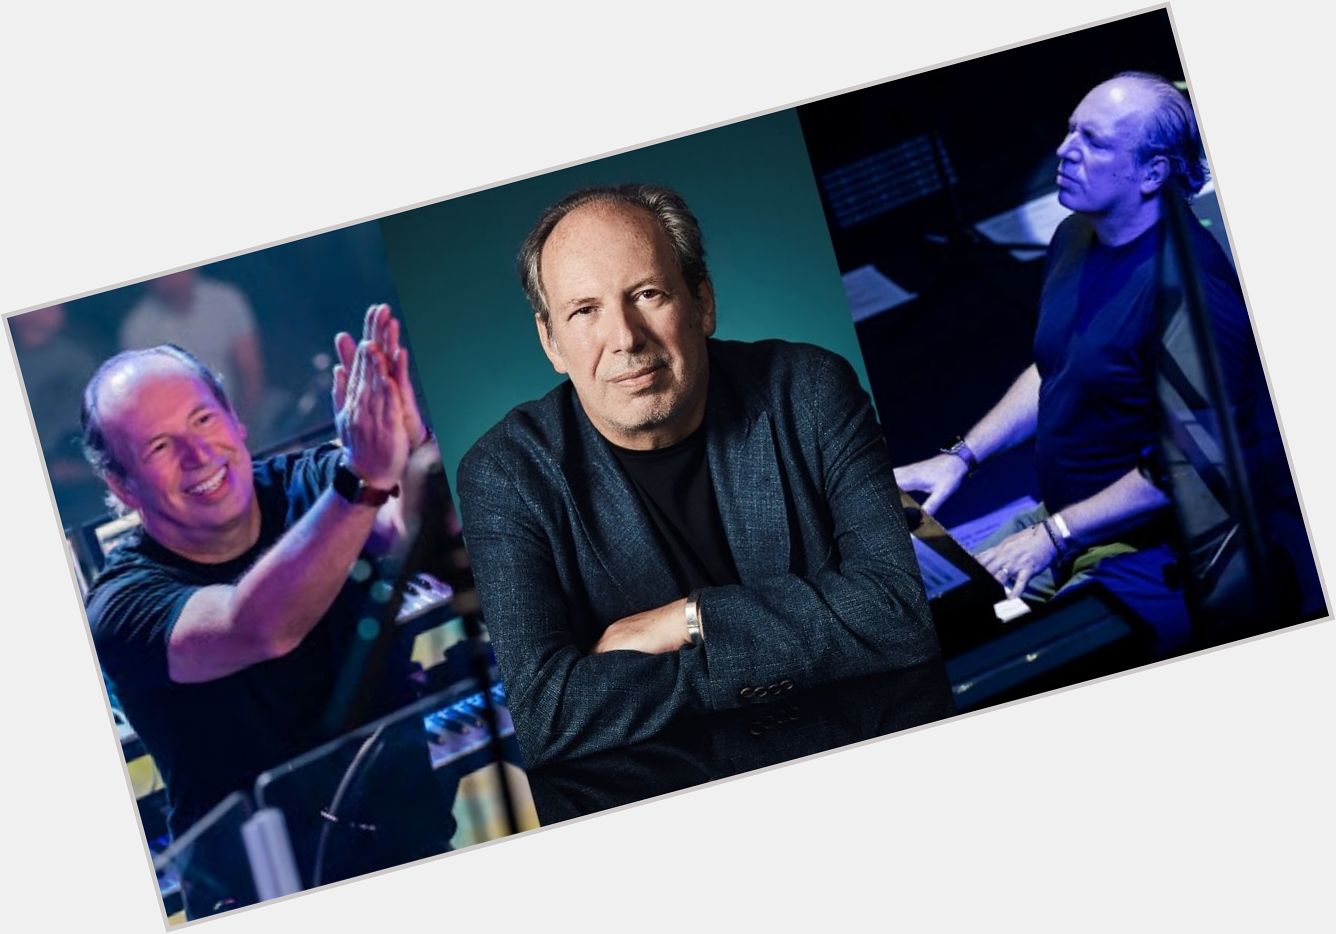 Happy Birthday to Hans Zimmer! If you had to choose only one, what would be your favourite film score by him? 